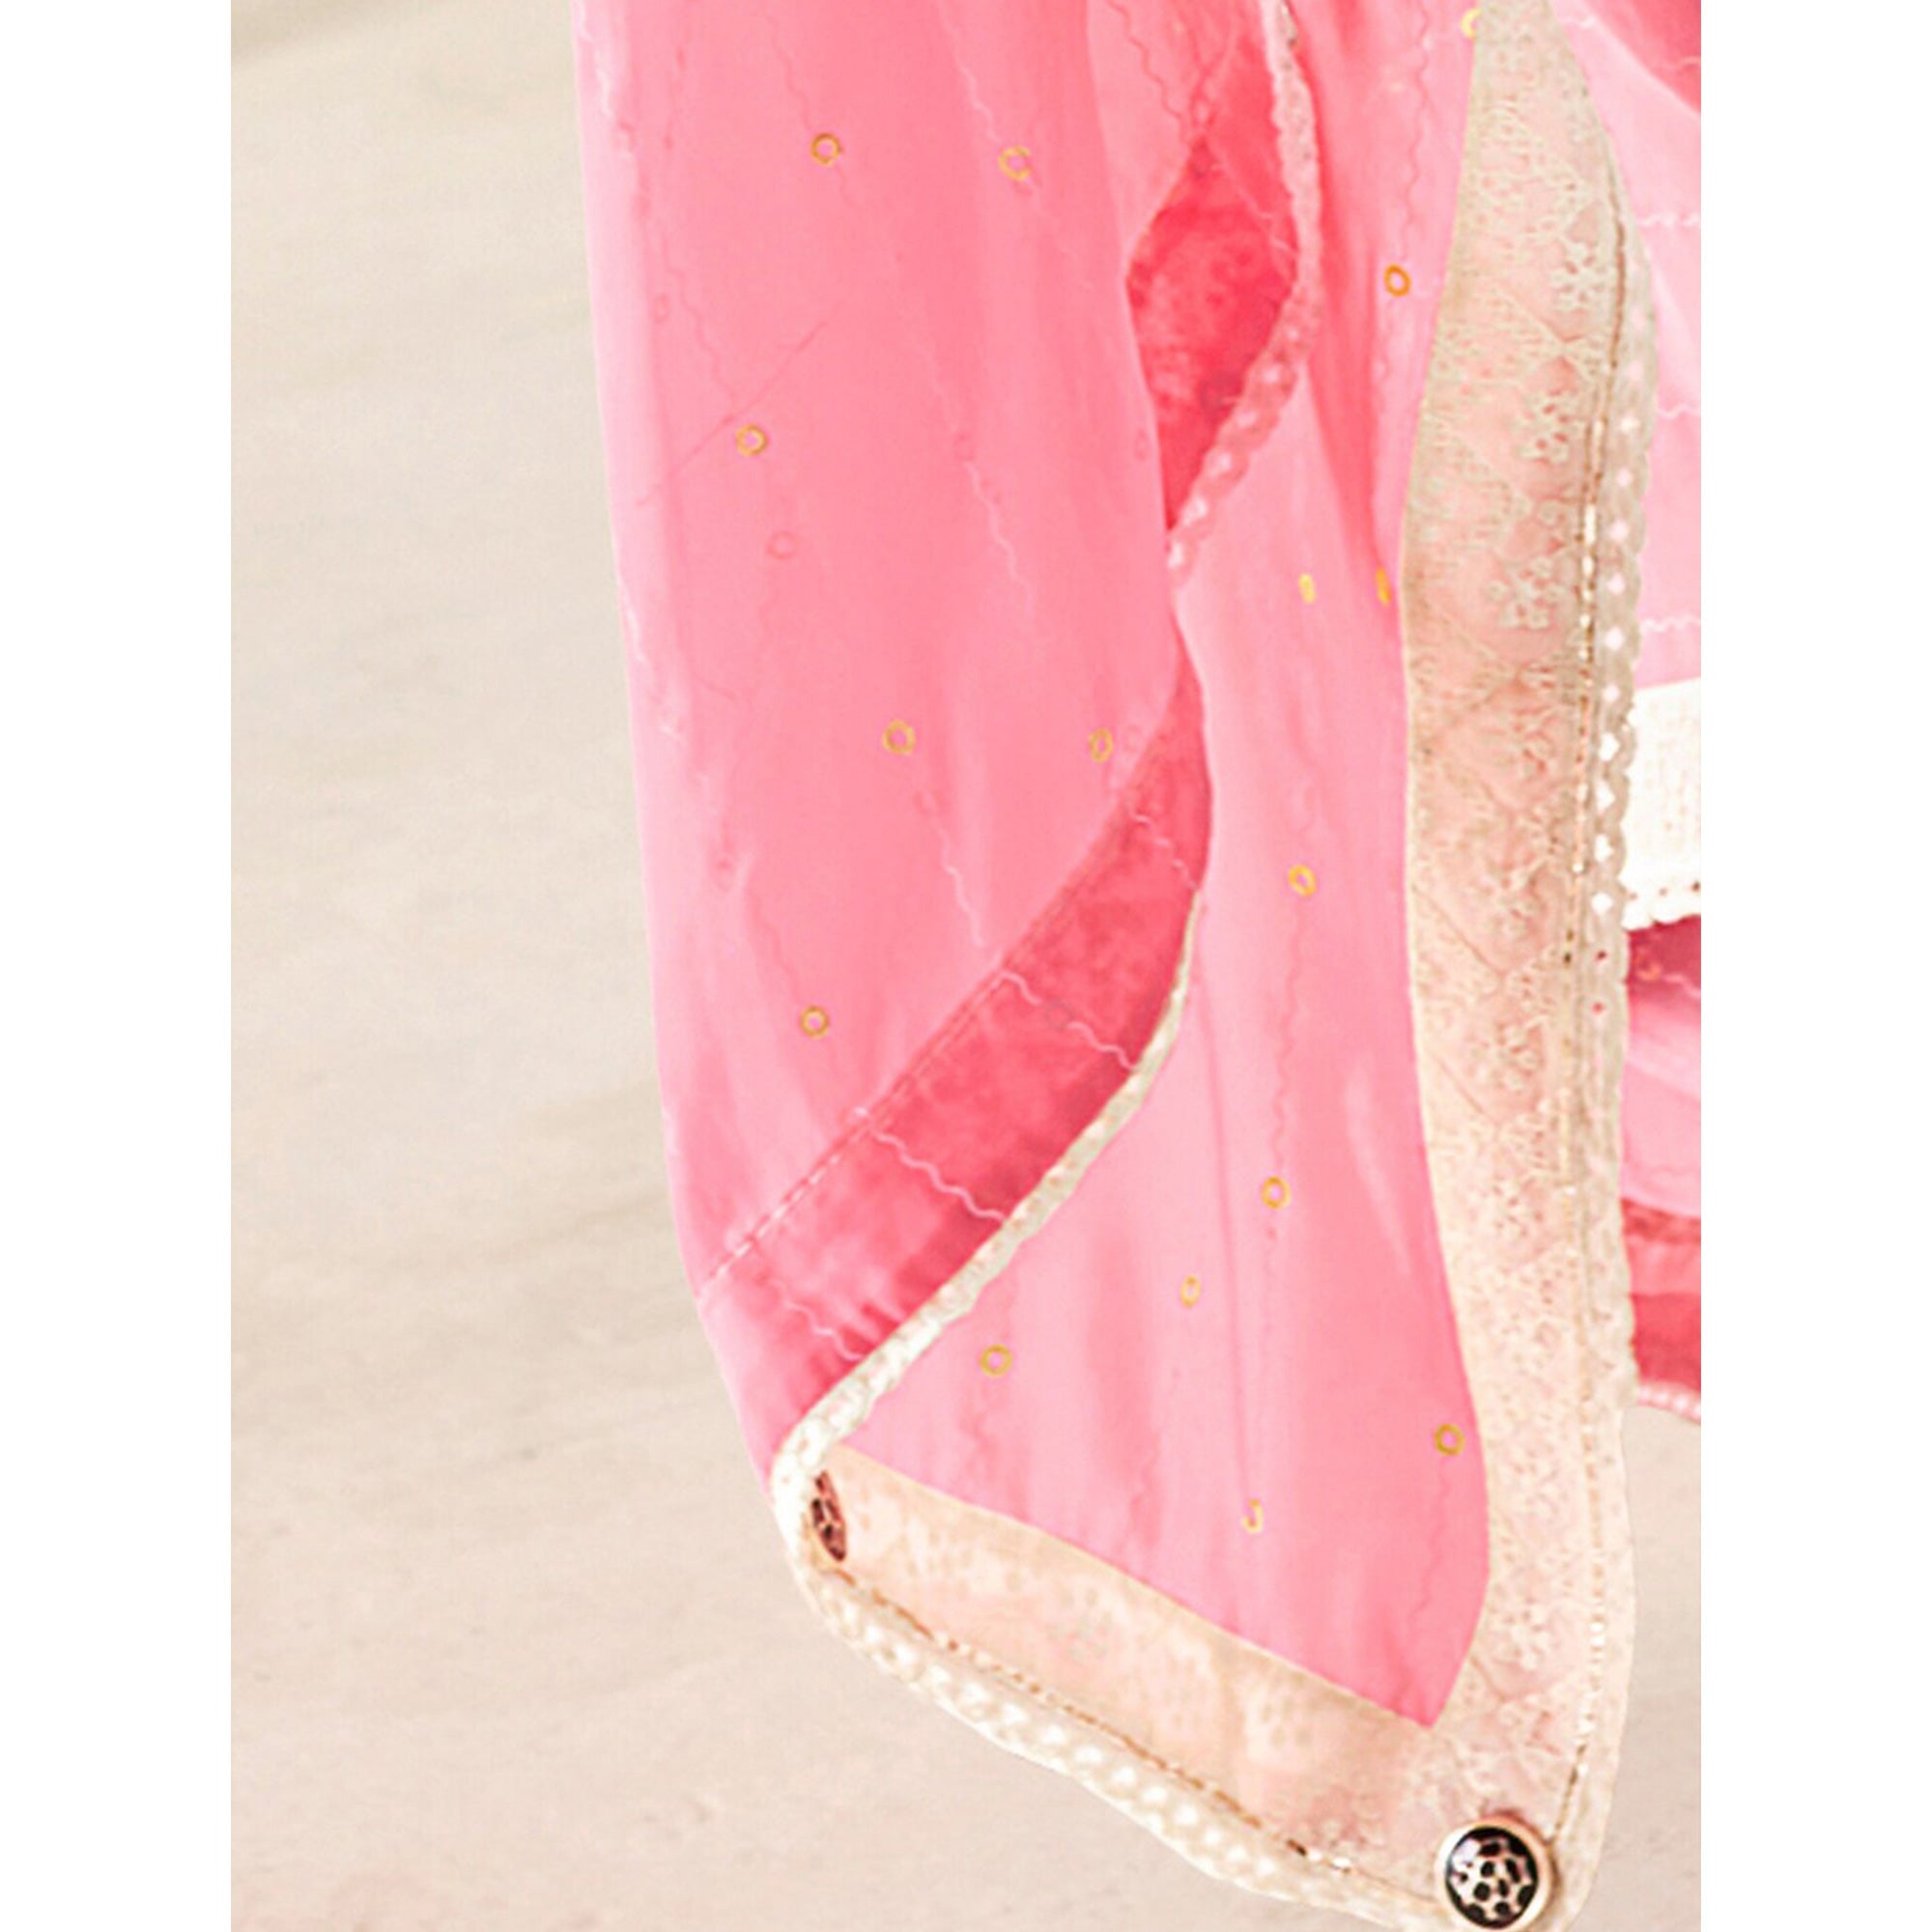 Light Pink Foil Printed Georgette Saree With Embroidered Border